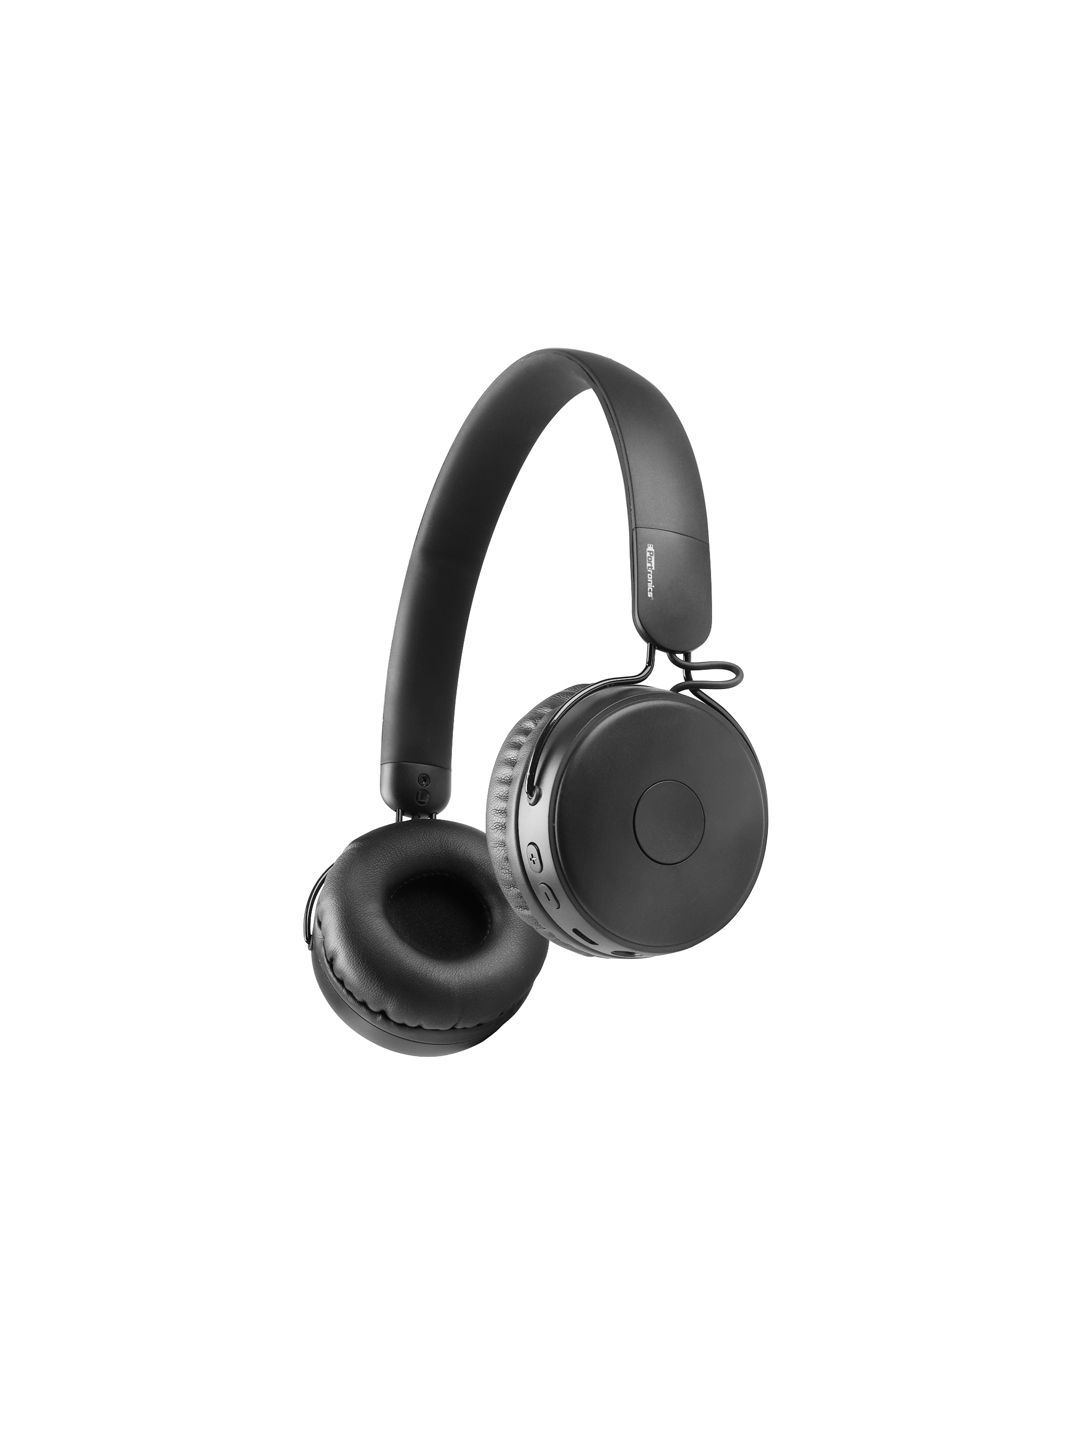 Portronics Black Solid Wireless Stereo On-Ear Headphones Price in India